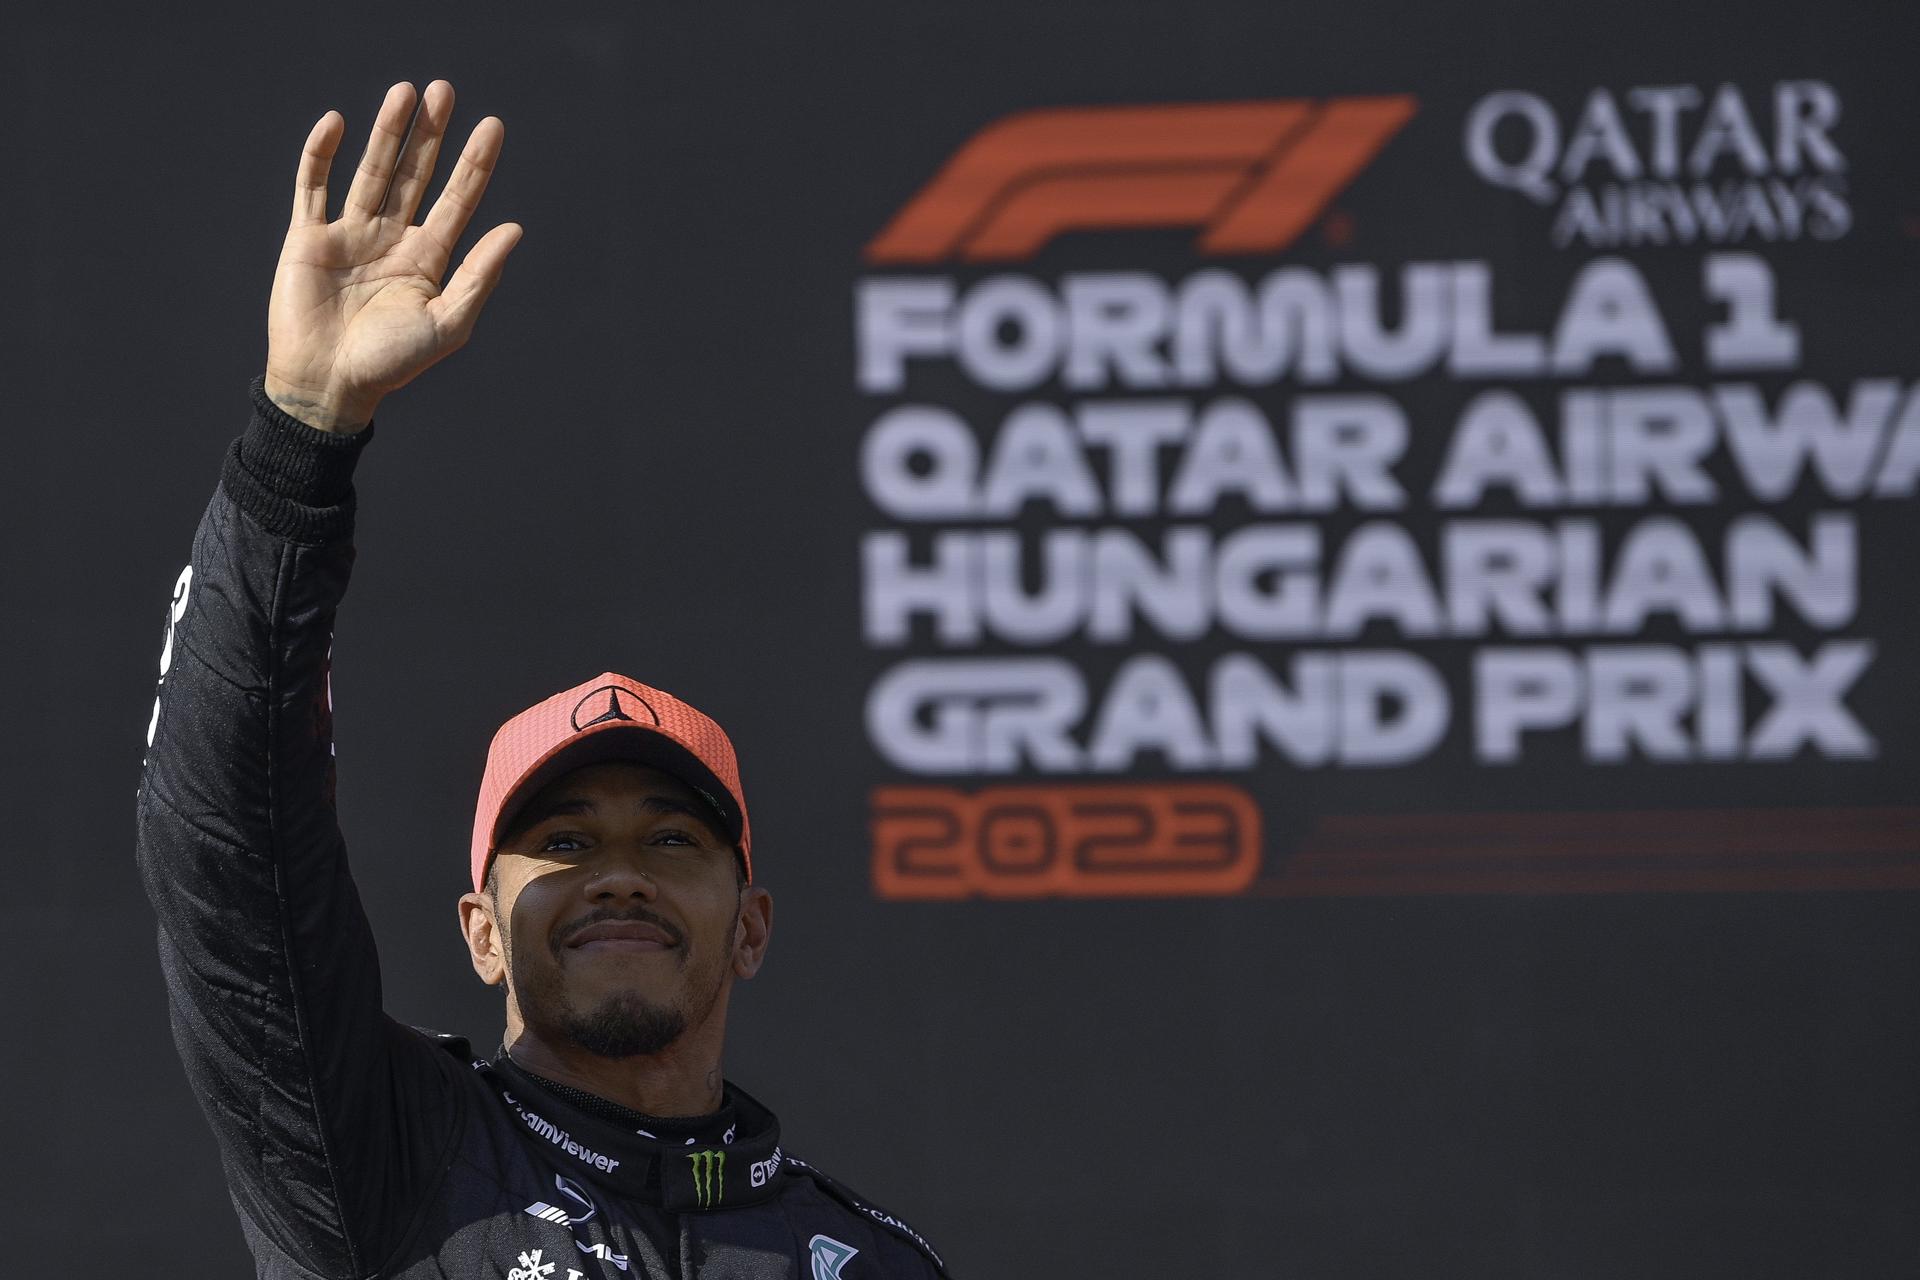 Lewis Hamilton (Mercedes) celebrates after winning pole position in qualifying for the Formula One Hungarian Grand Prix in Mogyorod, Hungary, on 22 July 2023. EFE/EPA/Zsolt Czegledi/HUNGARY OUT
